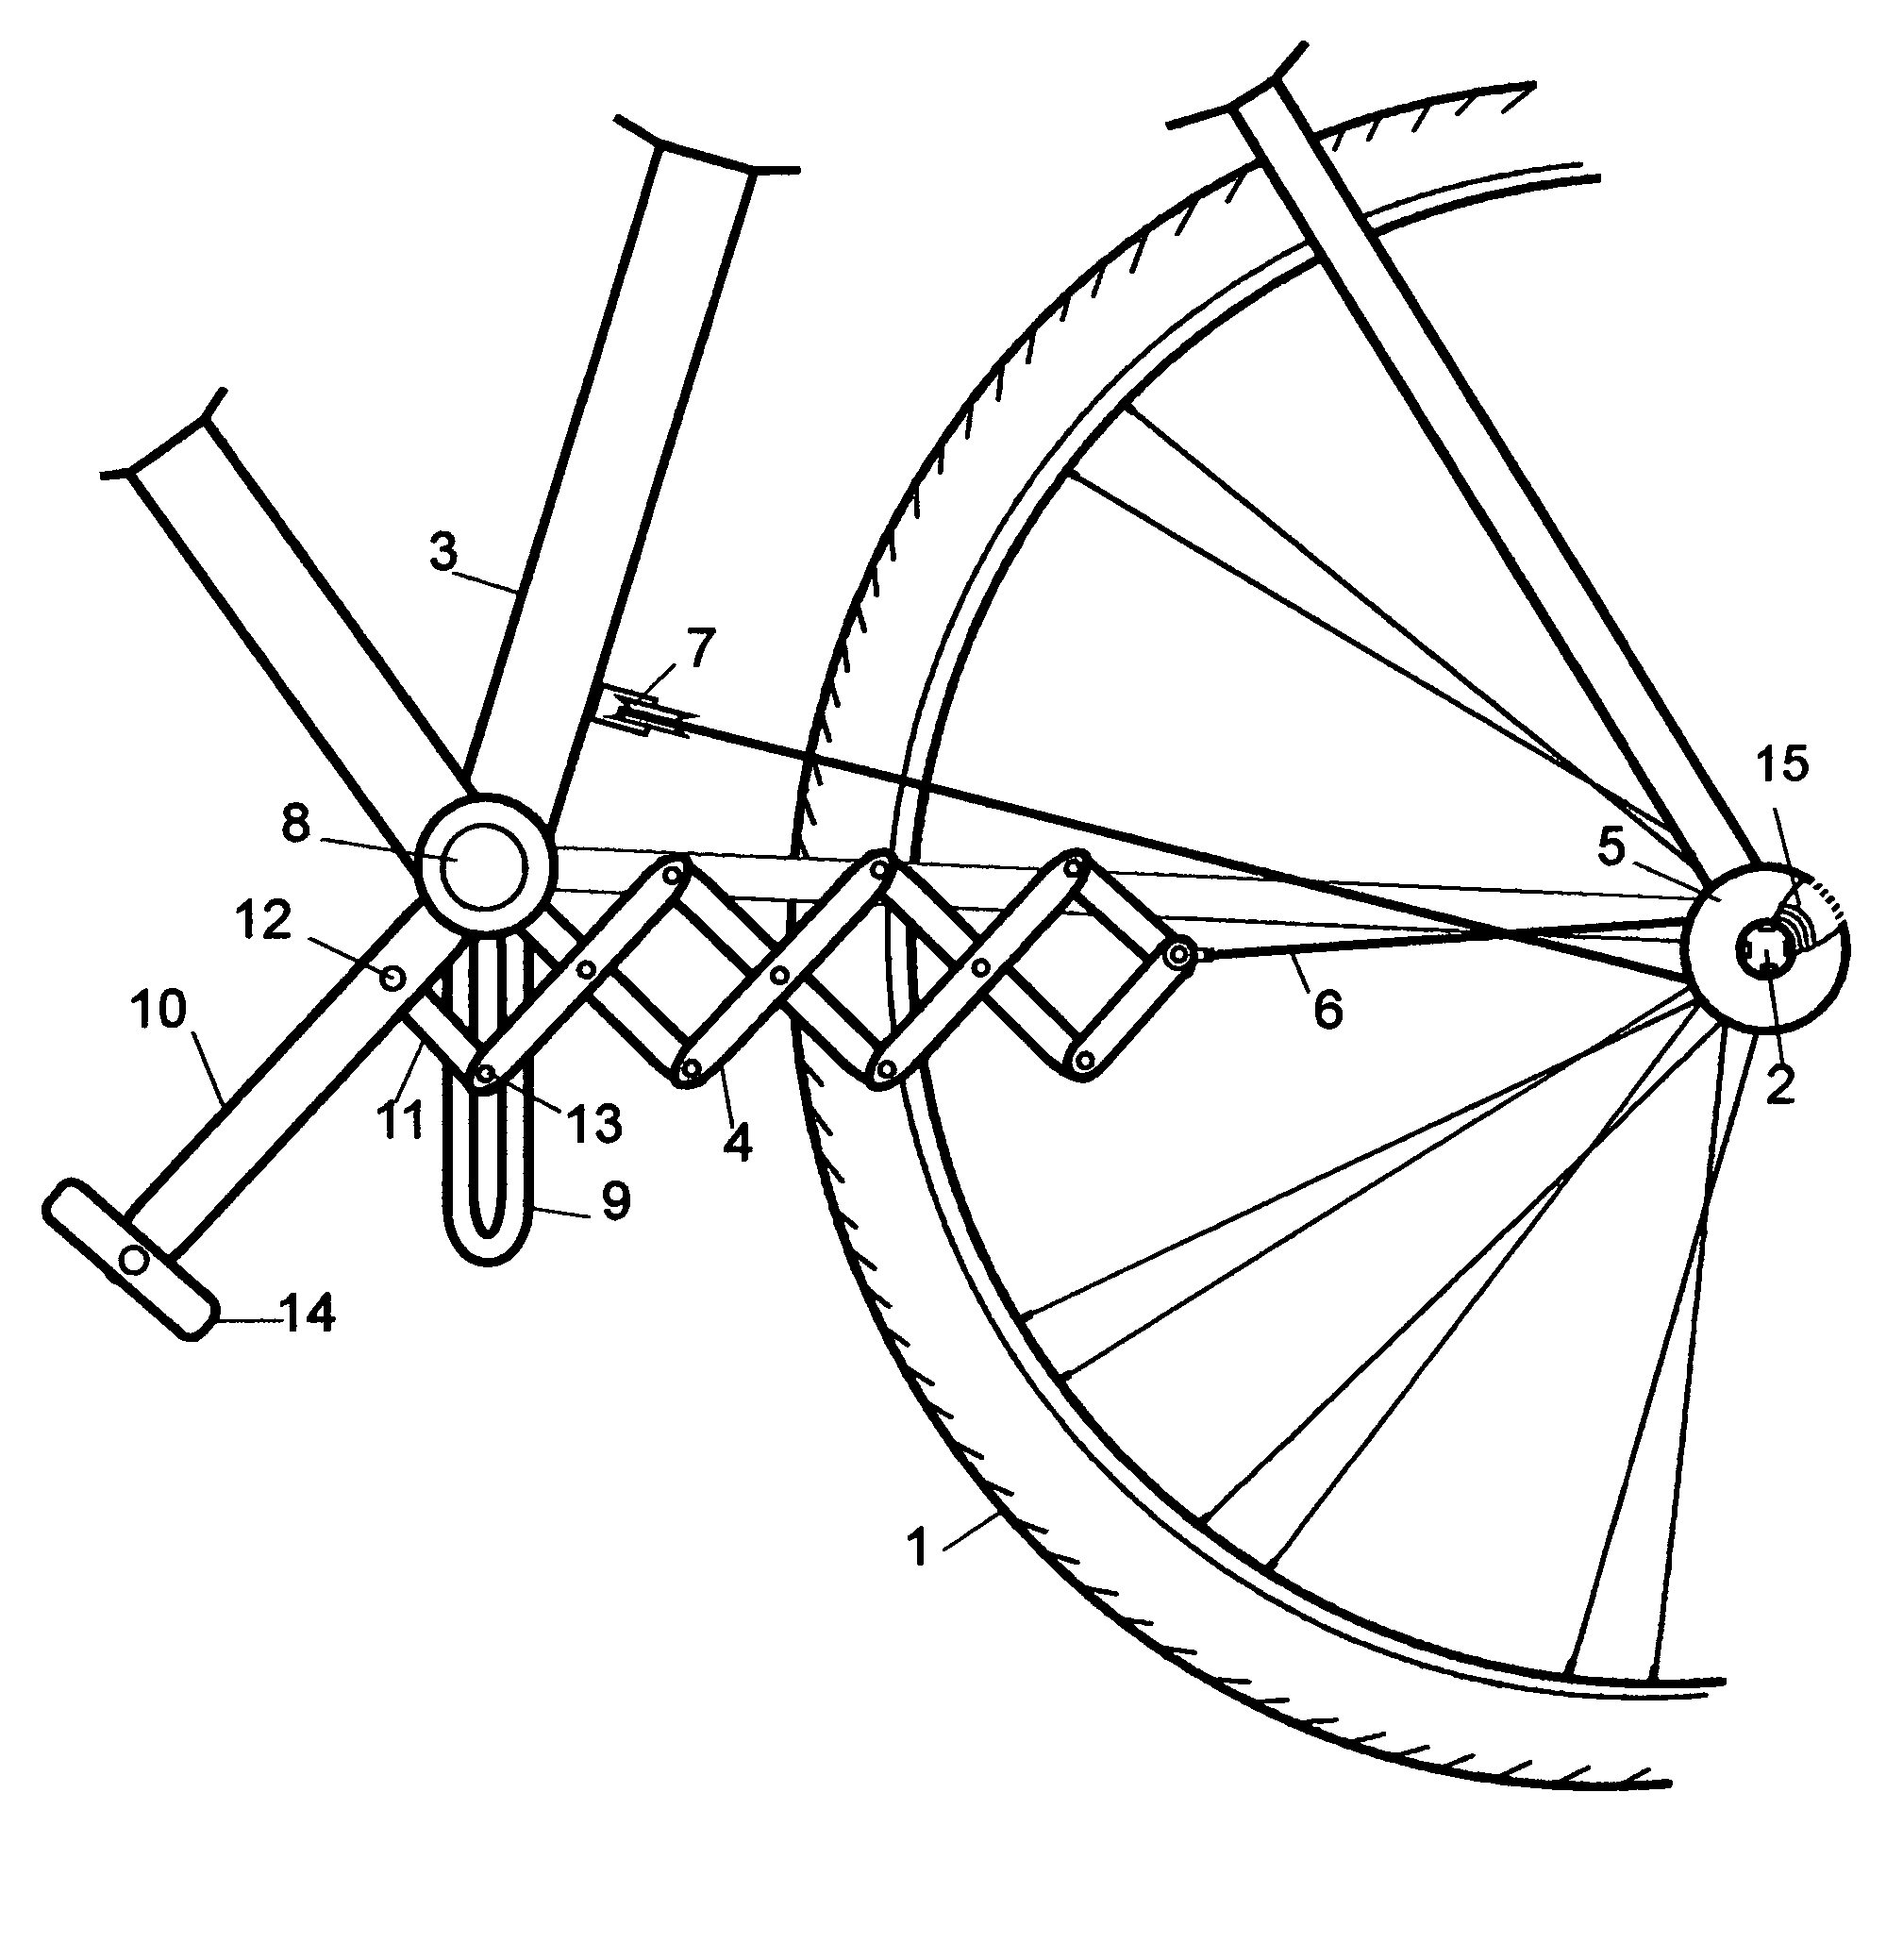 Power pedal for a bicycle